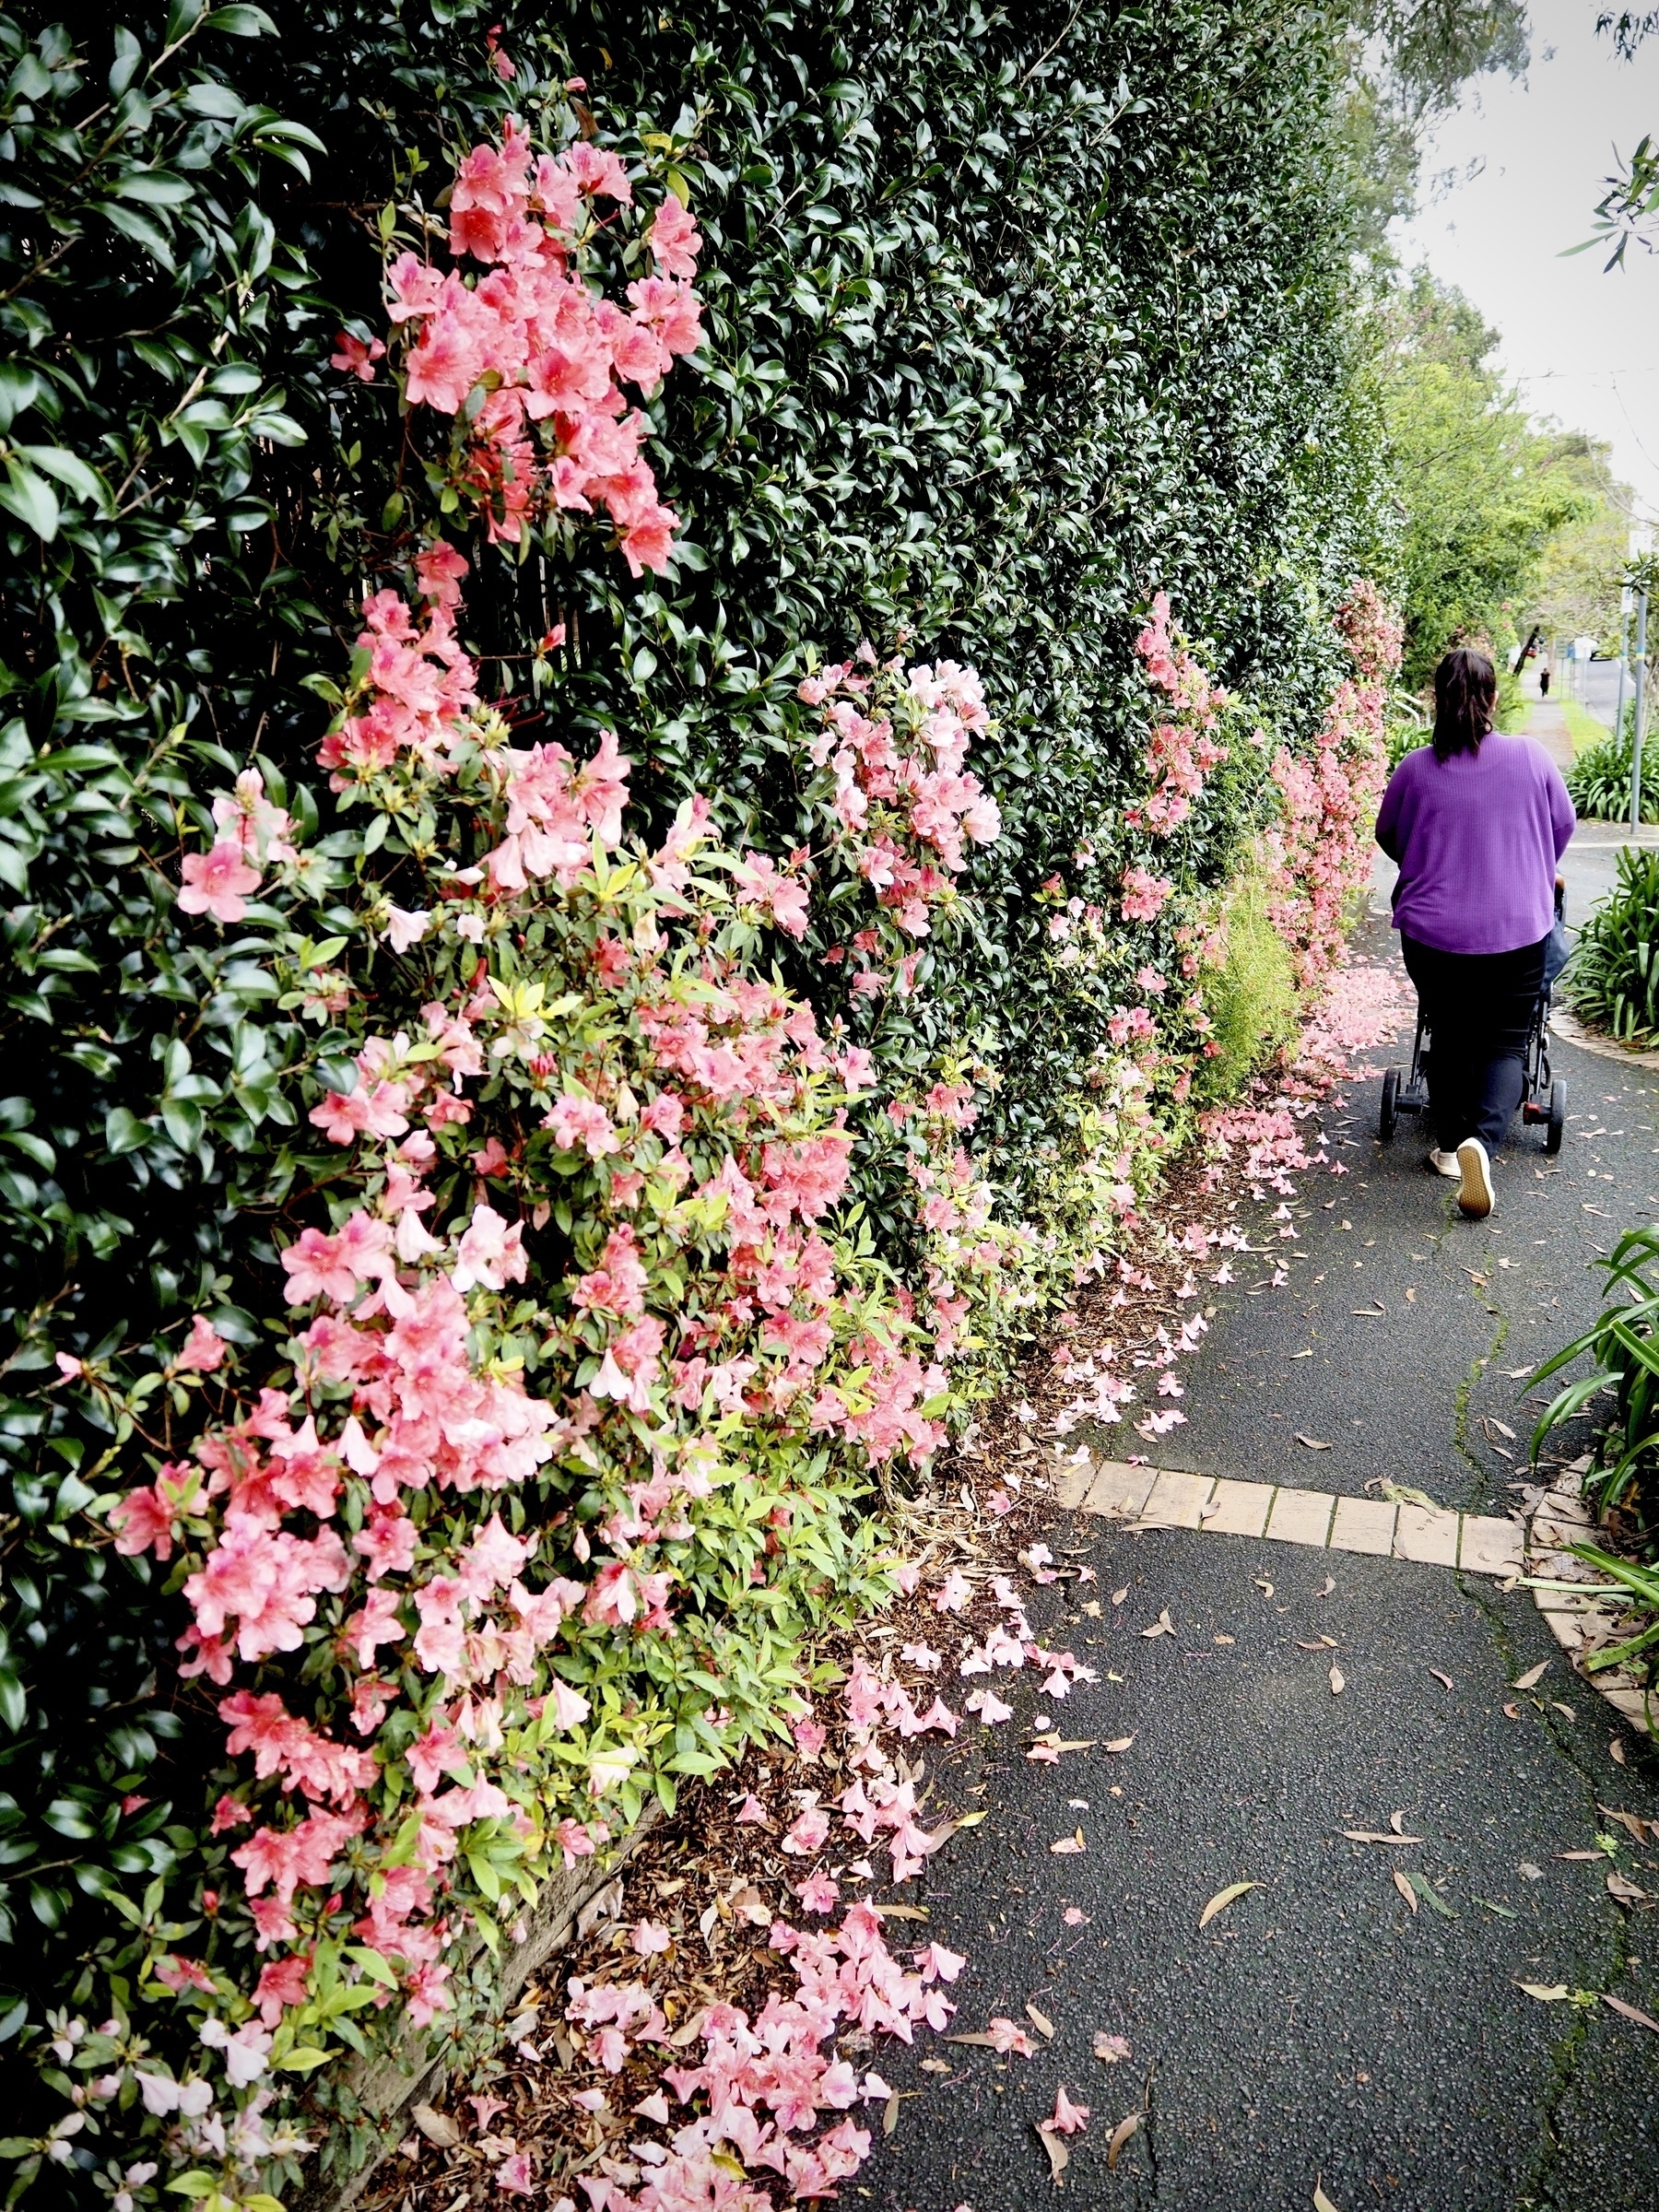 A woman pushes a stroller down a footpath, alongside a wall of flowers and leaves.